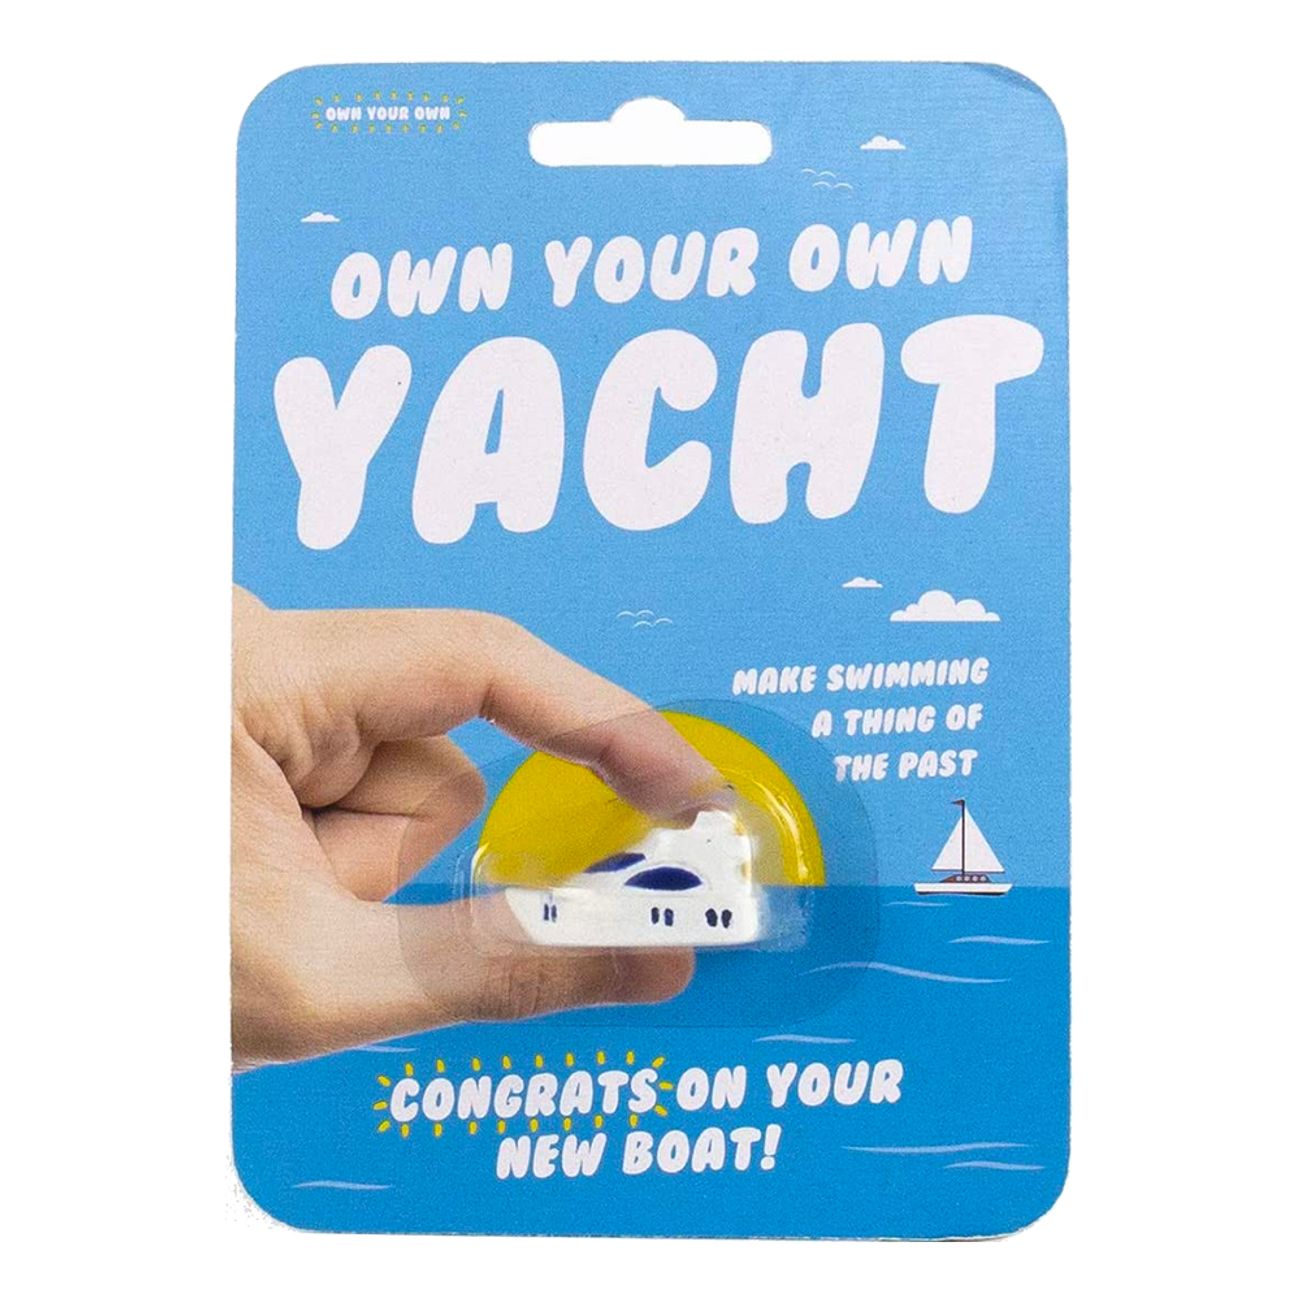 own-your-own-yacht-80705-1